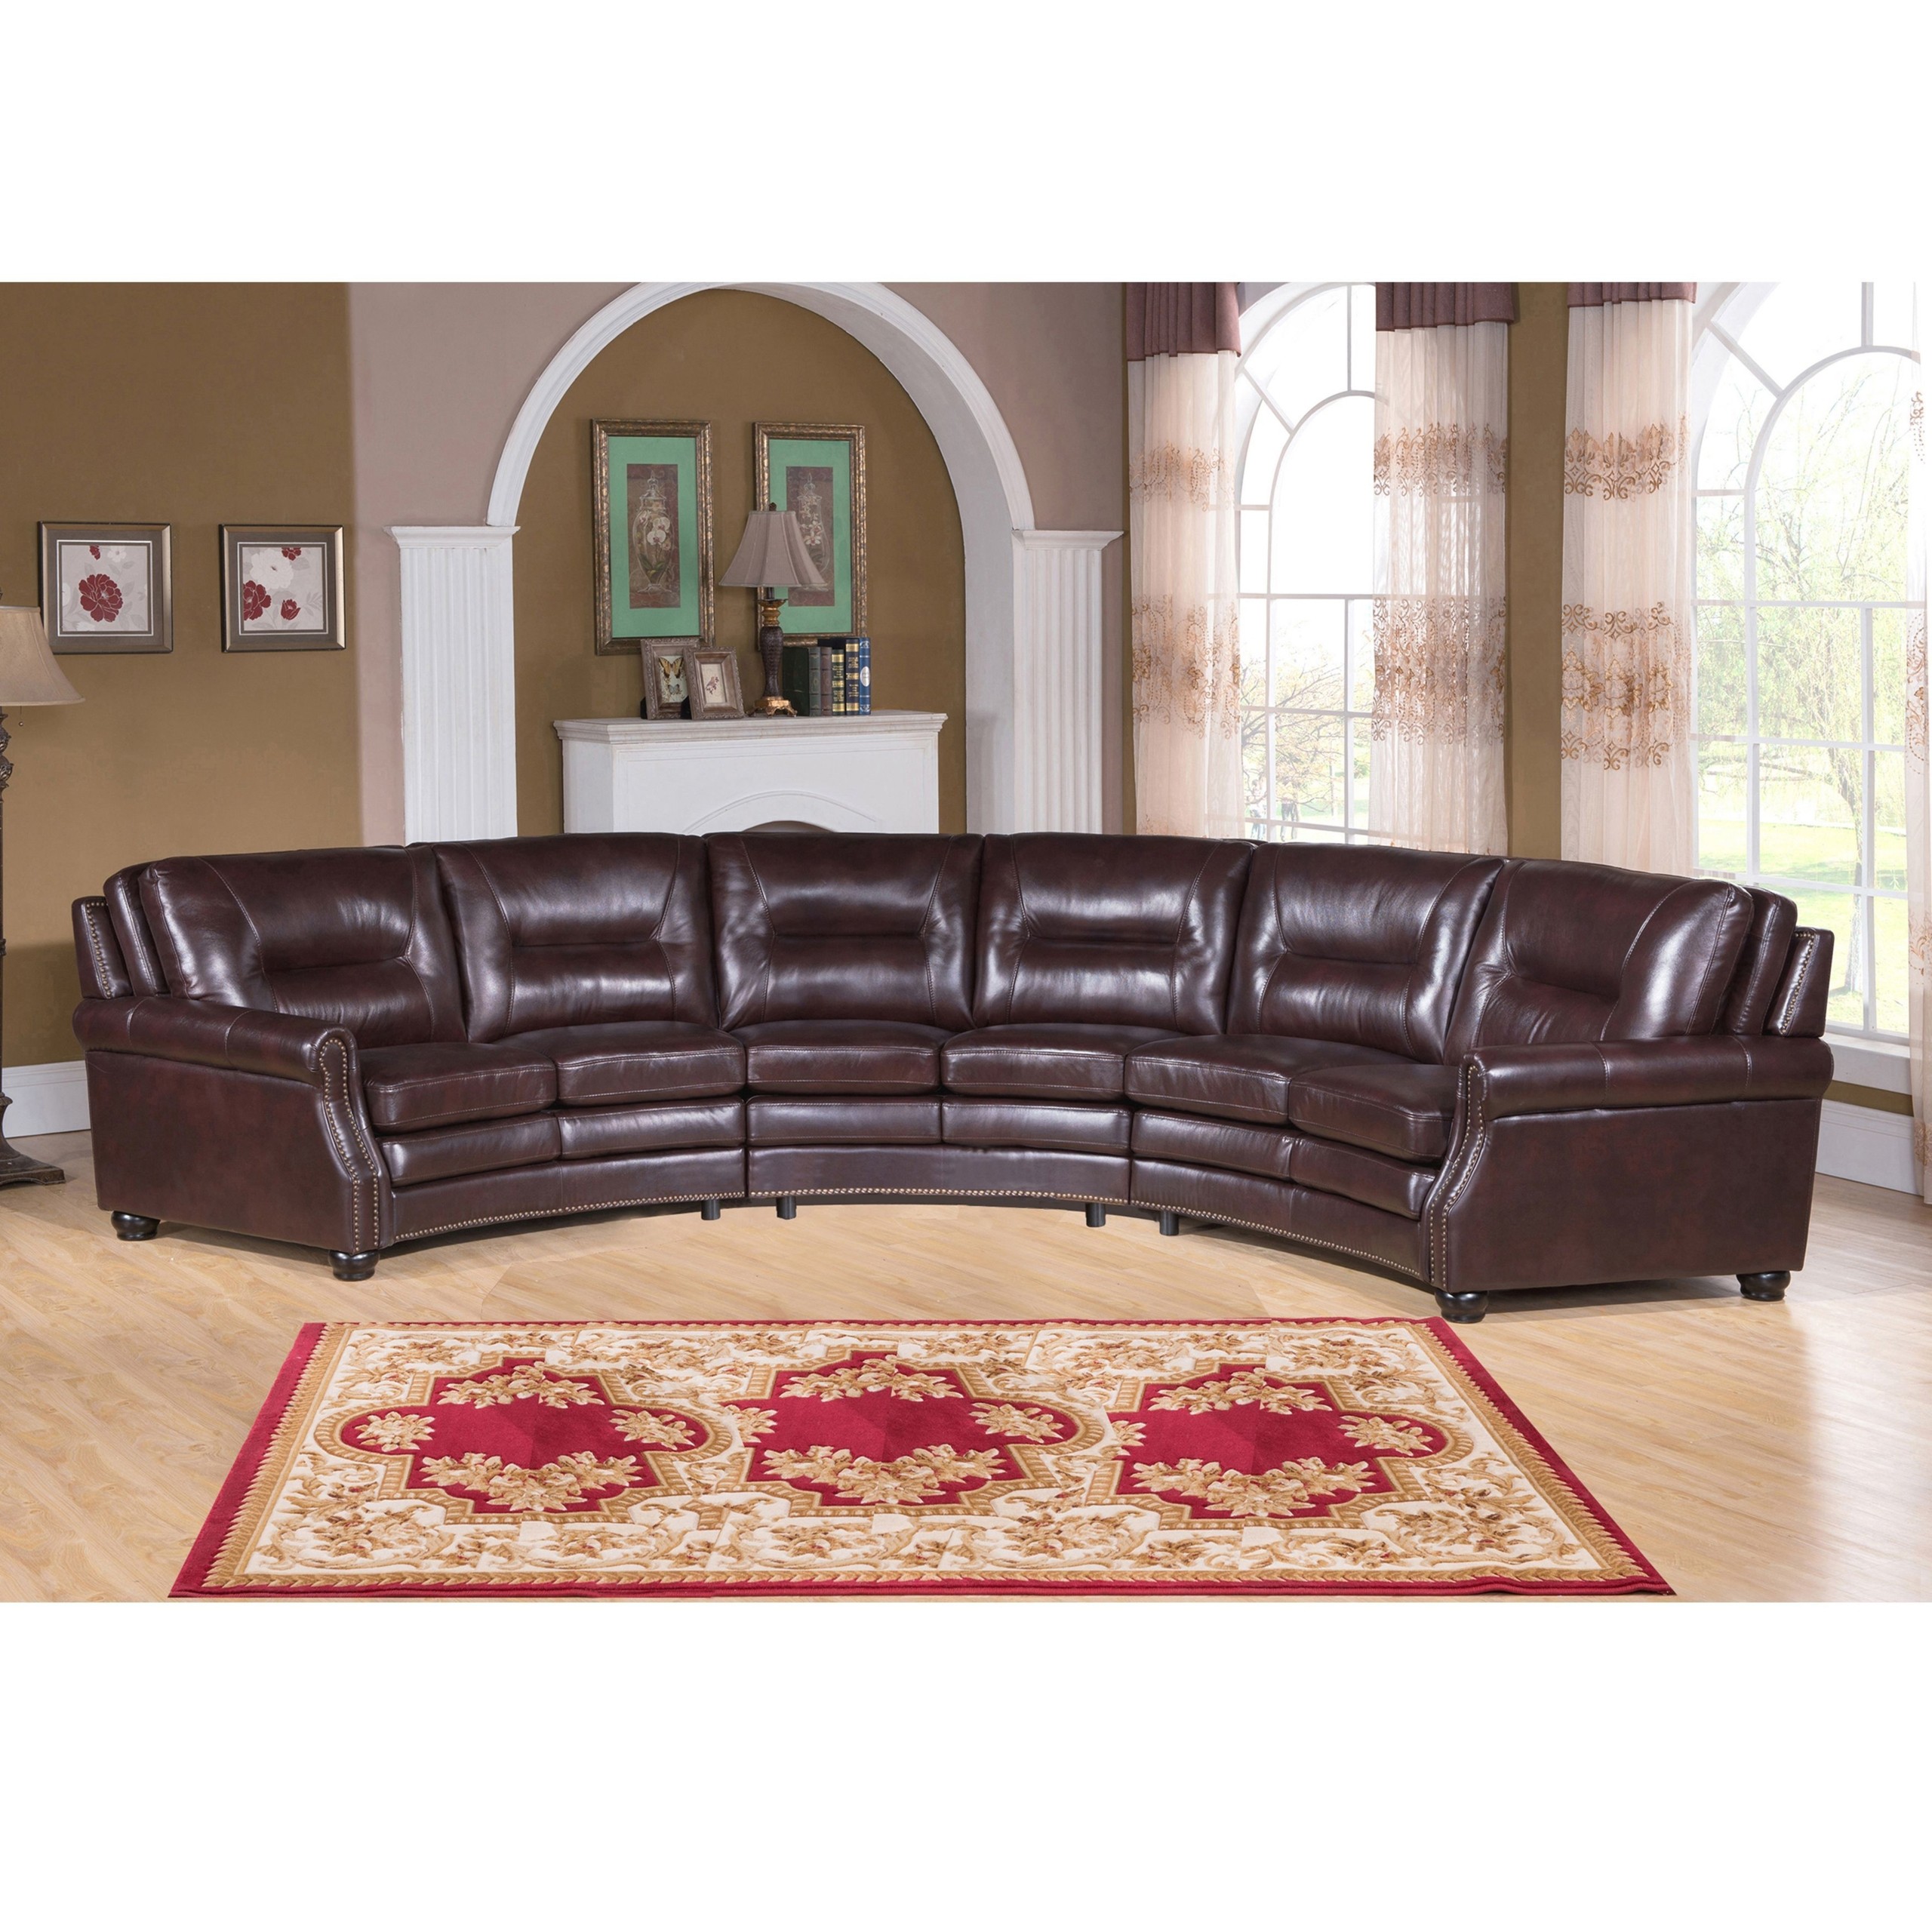 Curved modern sectional